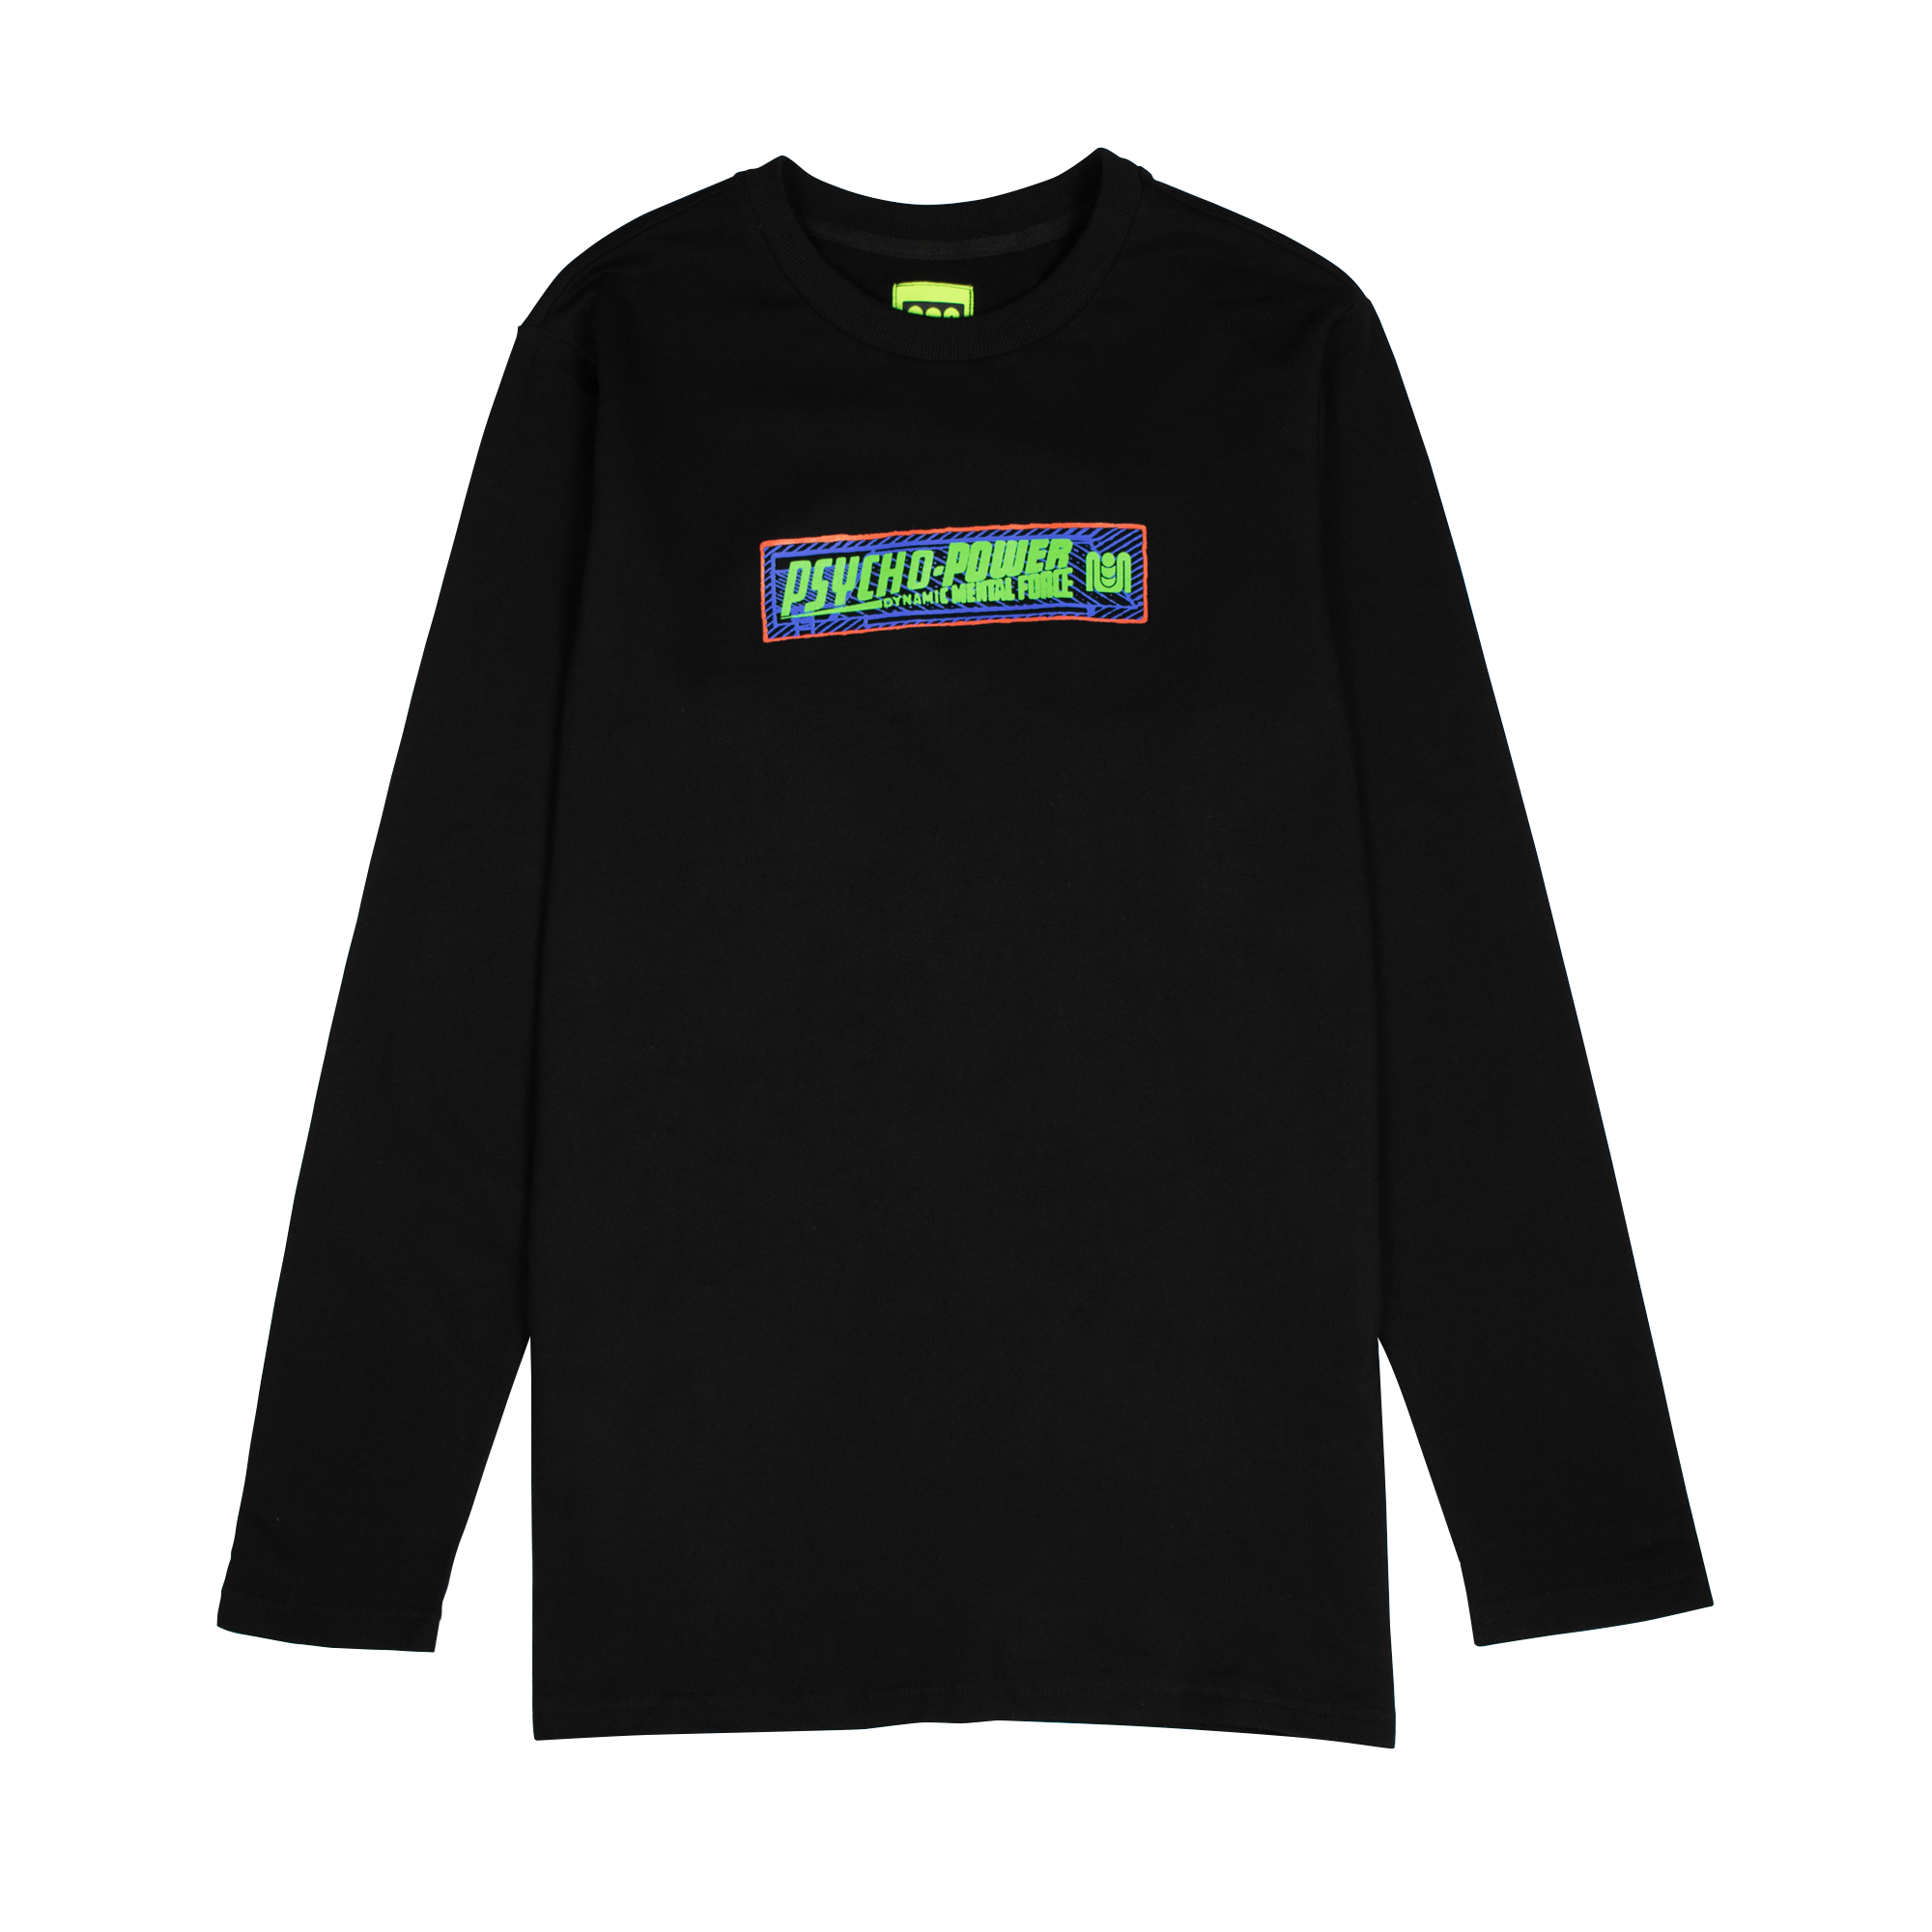 COME TO AN END LONG SLEEVE TEE - BLACK